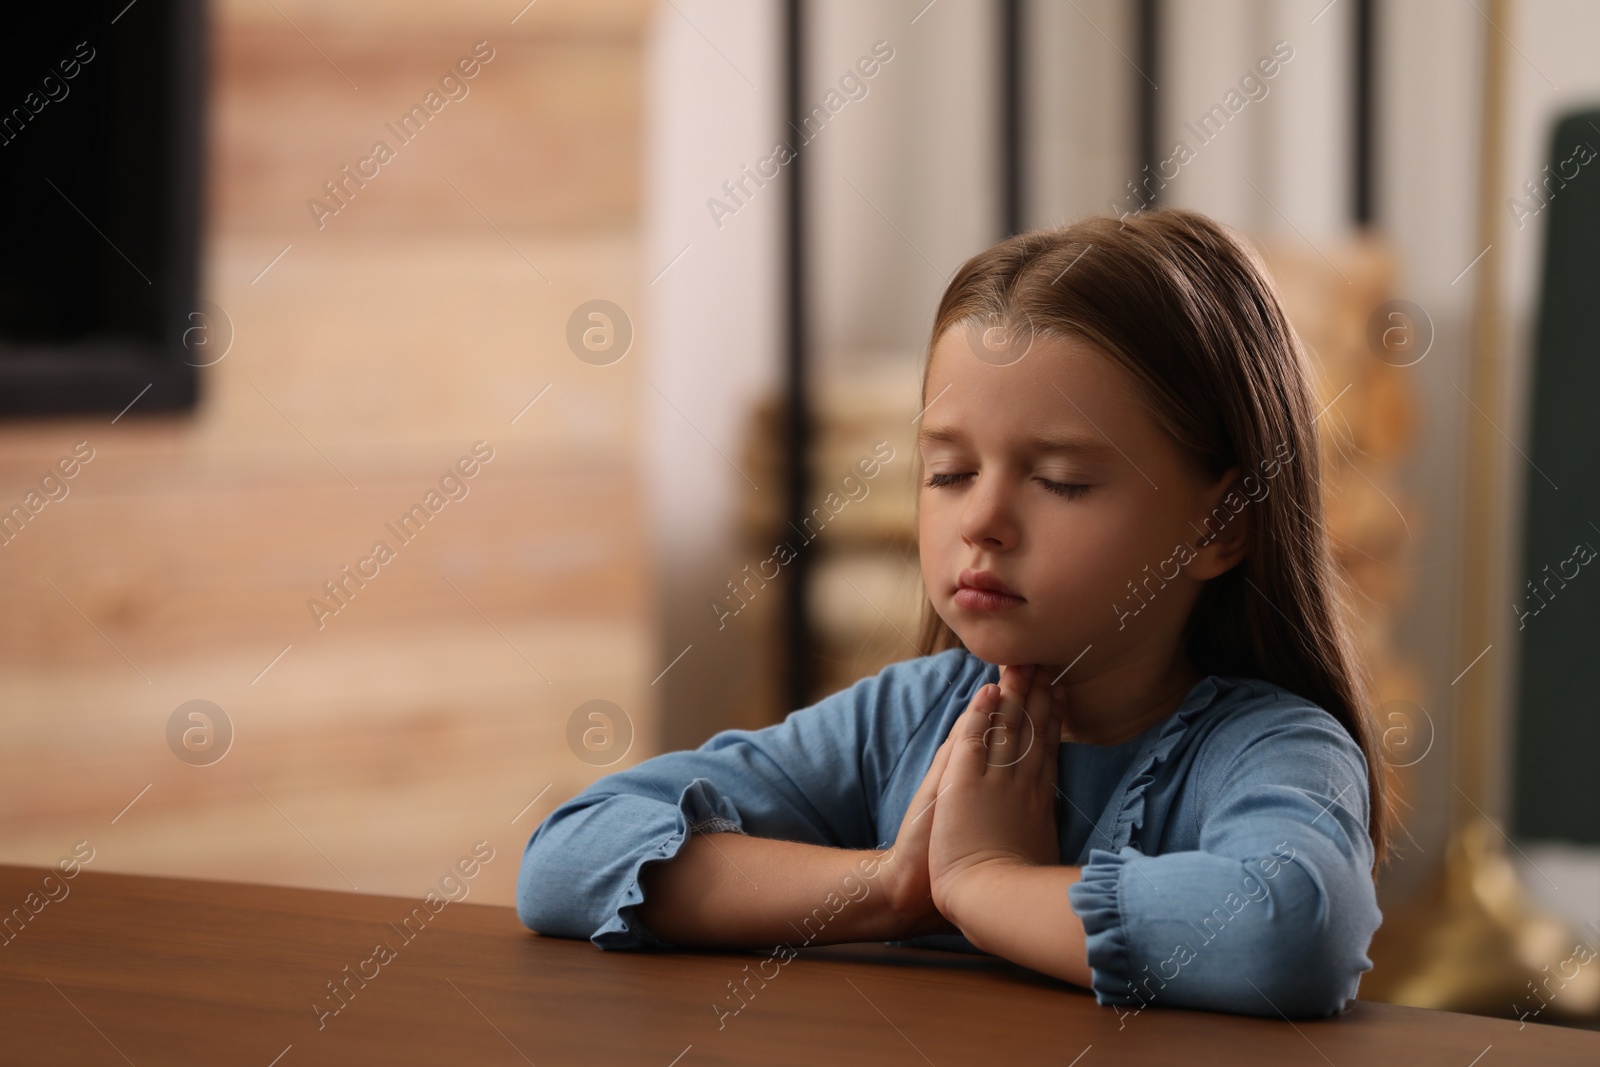 Photo of Cute little girl with hands clasped together praying at table indoors